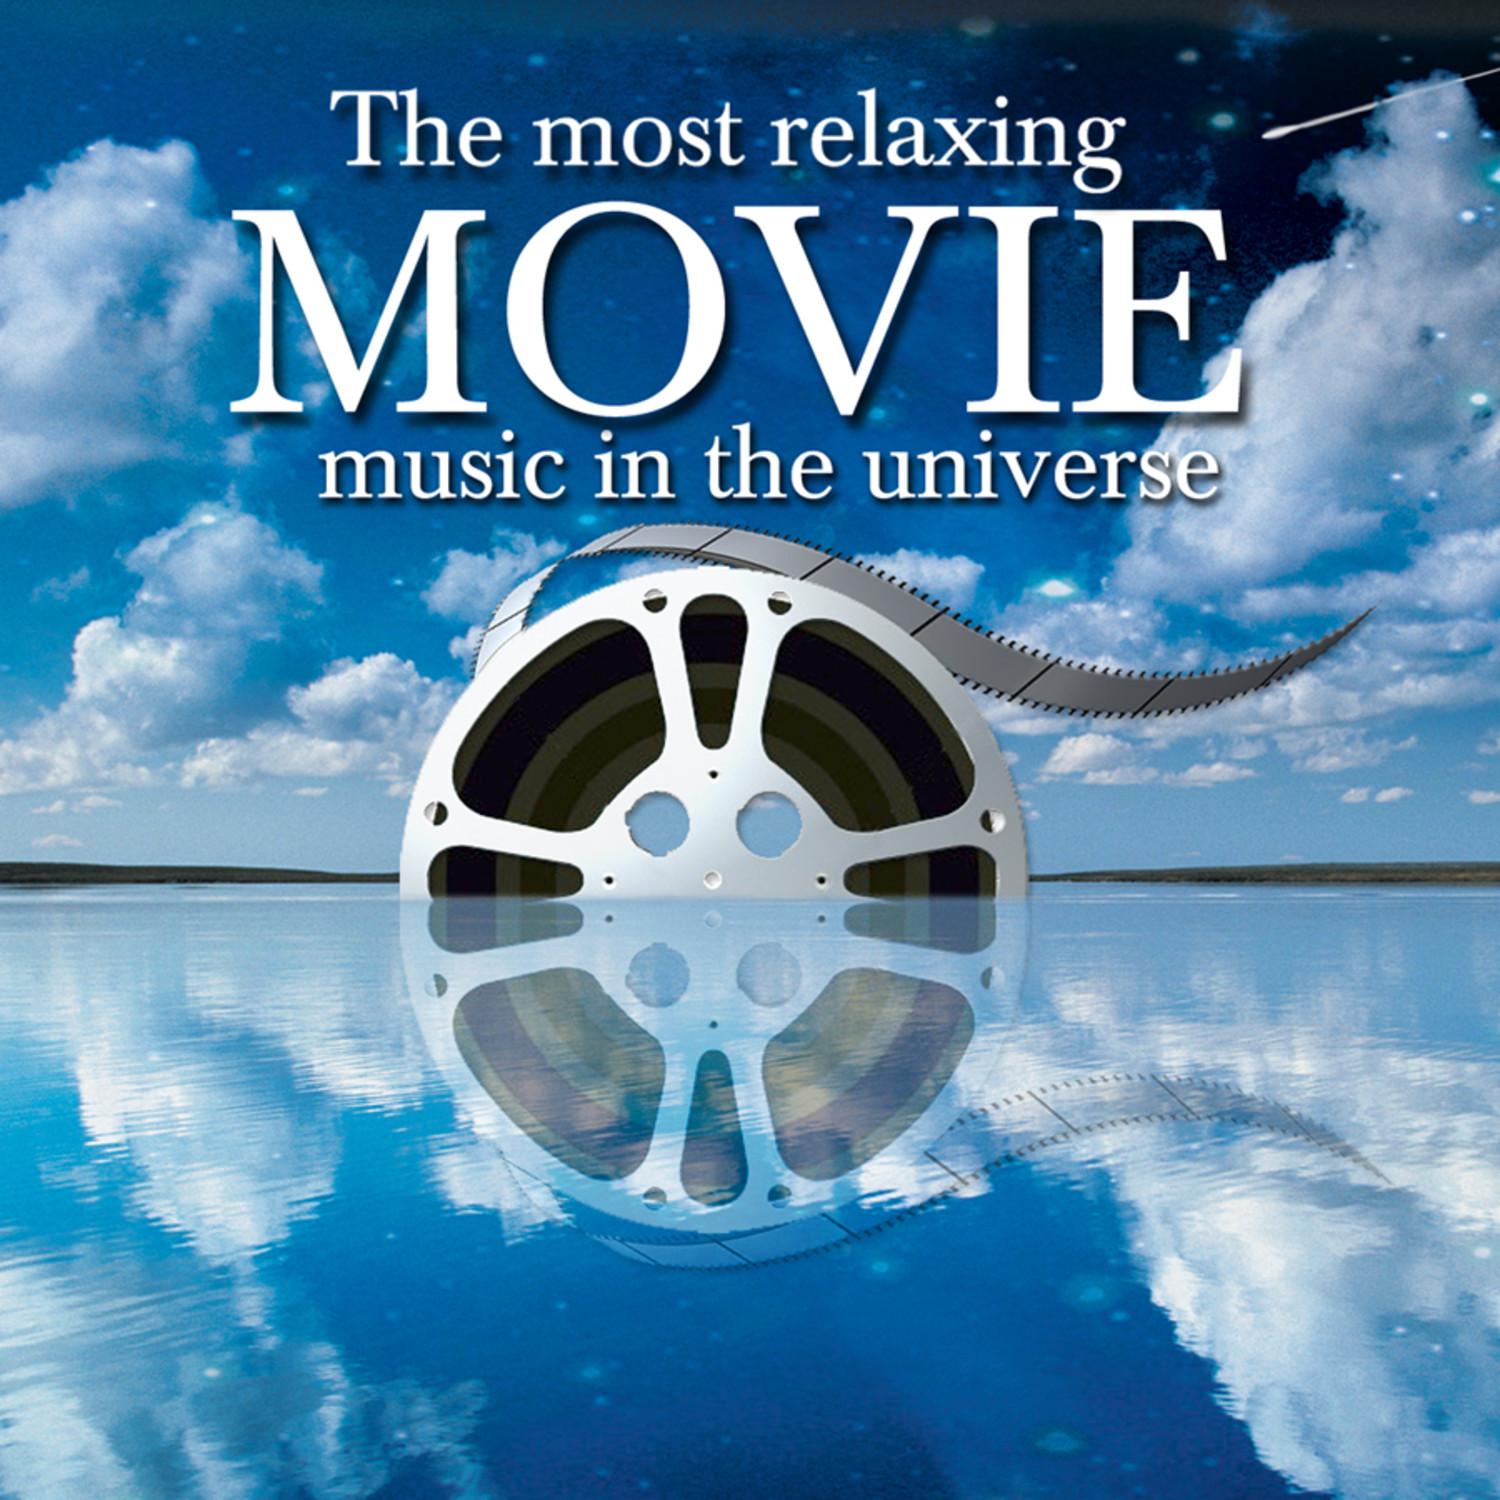 Most Relaxing MOVIE Music in the Universe